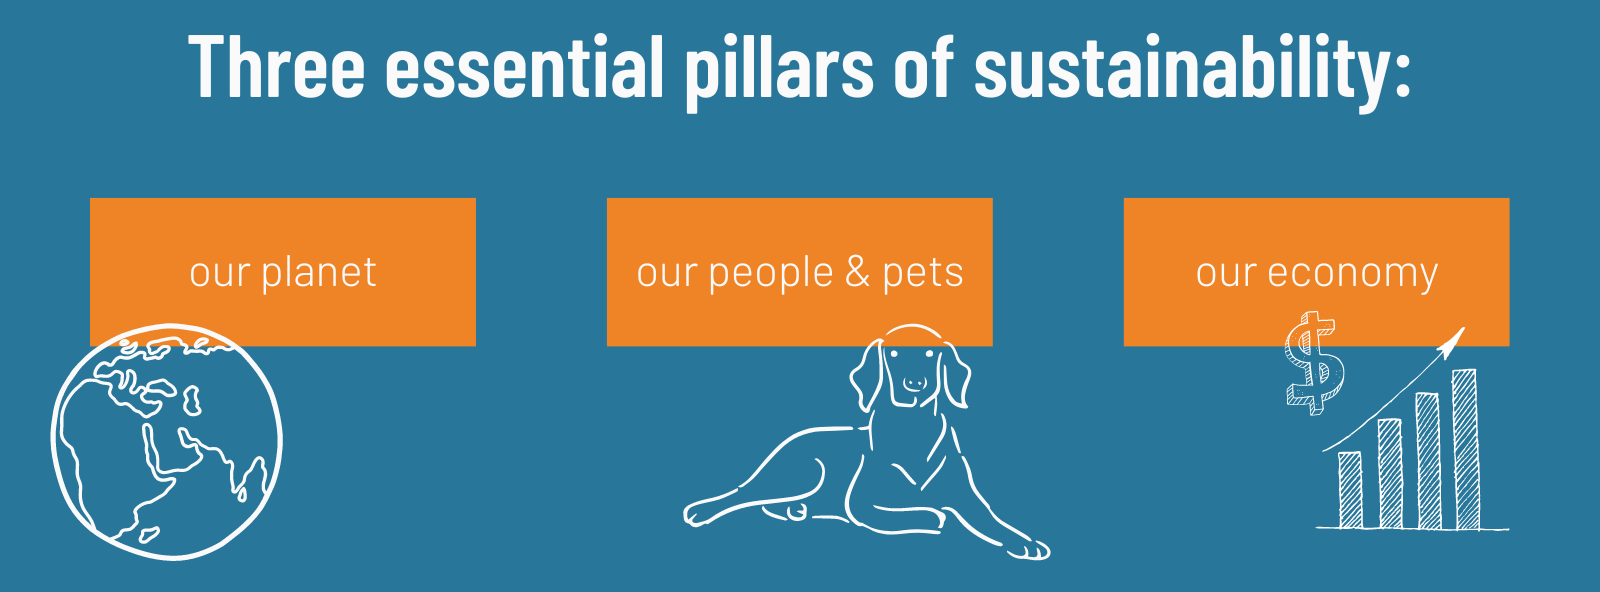 Three essential pillars of sustainability: our planet, our people & pets, our economy